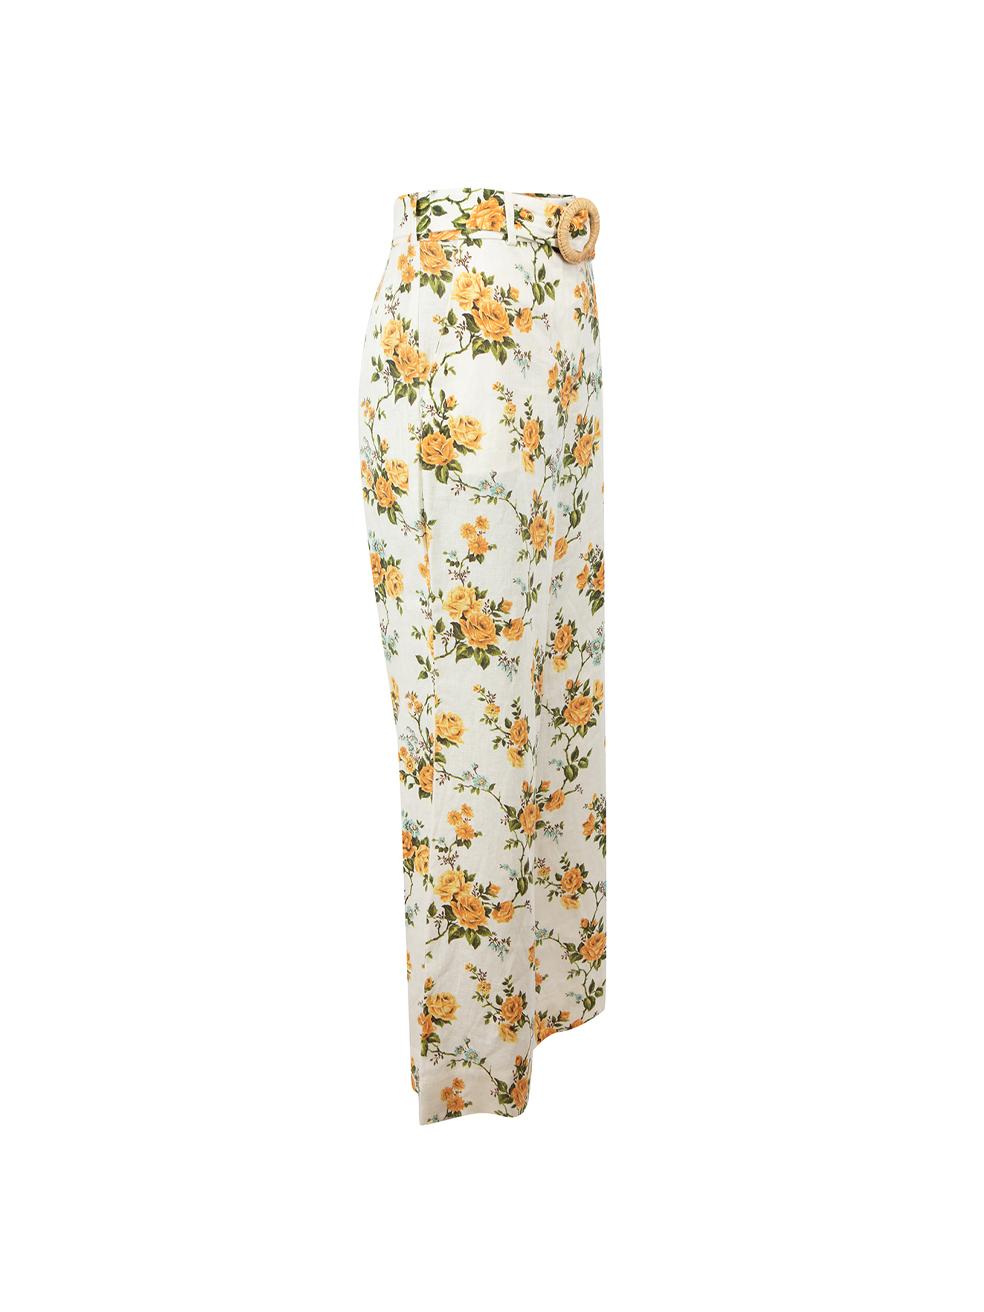 CONDITION is Very good. Hardly any visible wear to trousers is evident on this used Zimmermann designer resale item. 



Details


White

Linen

Wide leg culottes

Cropped length

High rise

Floral print pattern

Front zip closure with clasp and